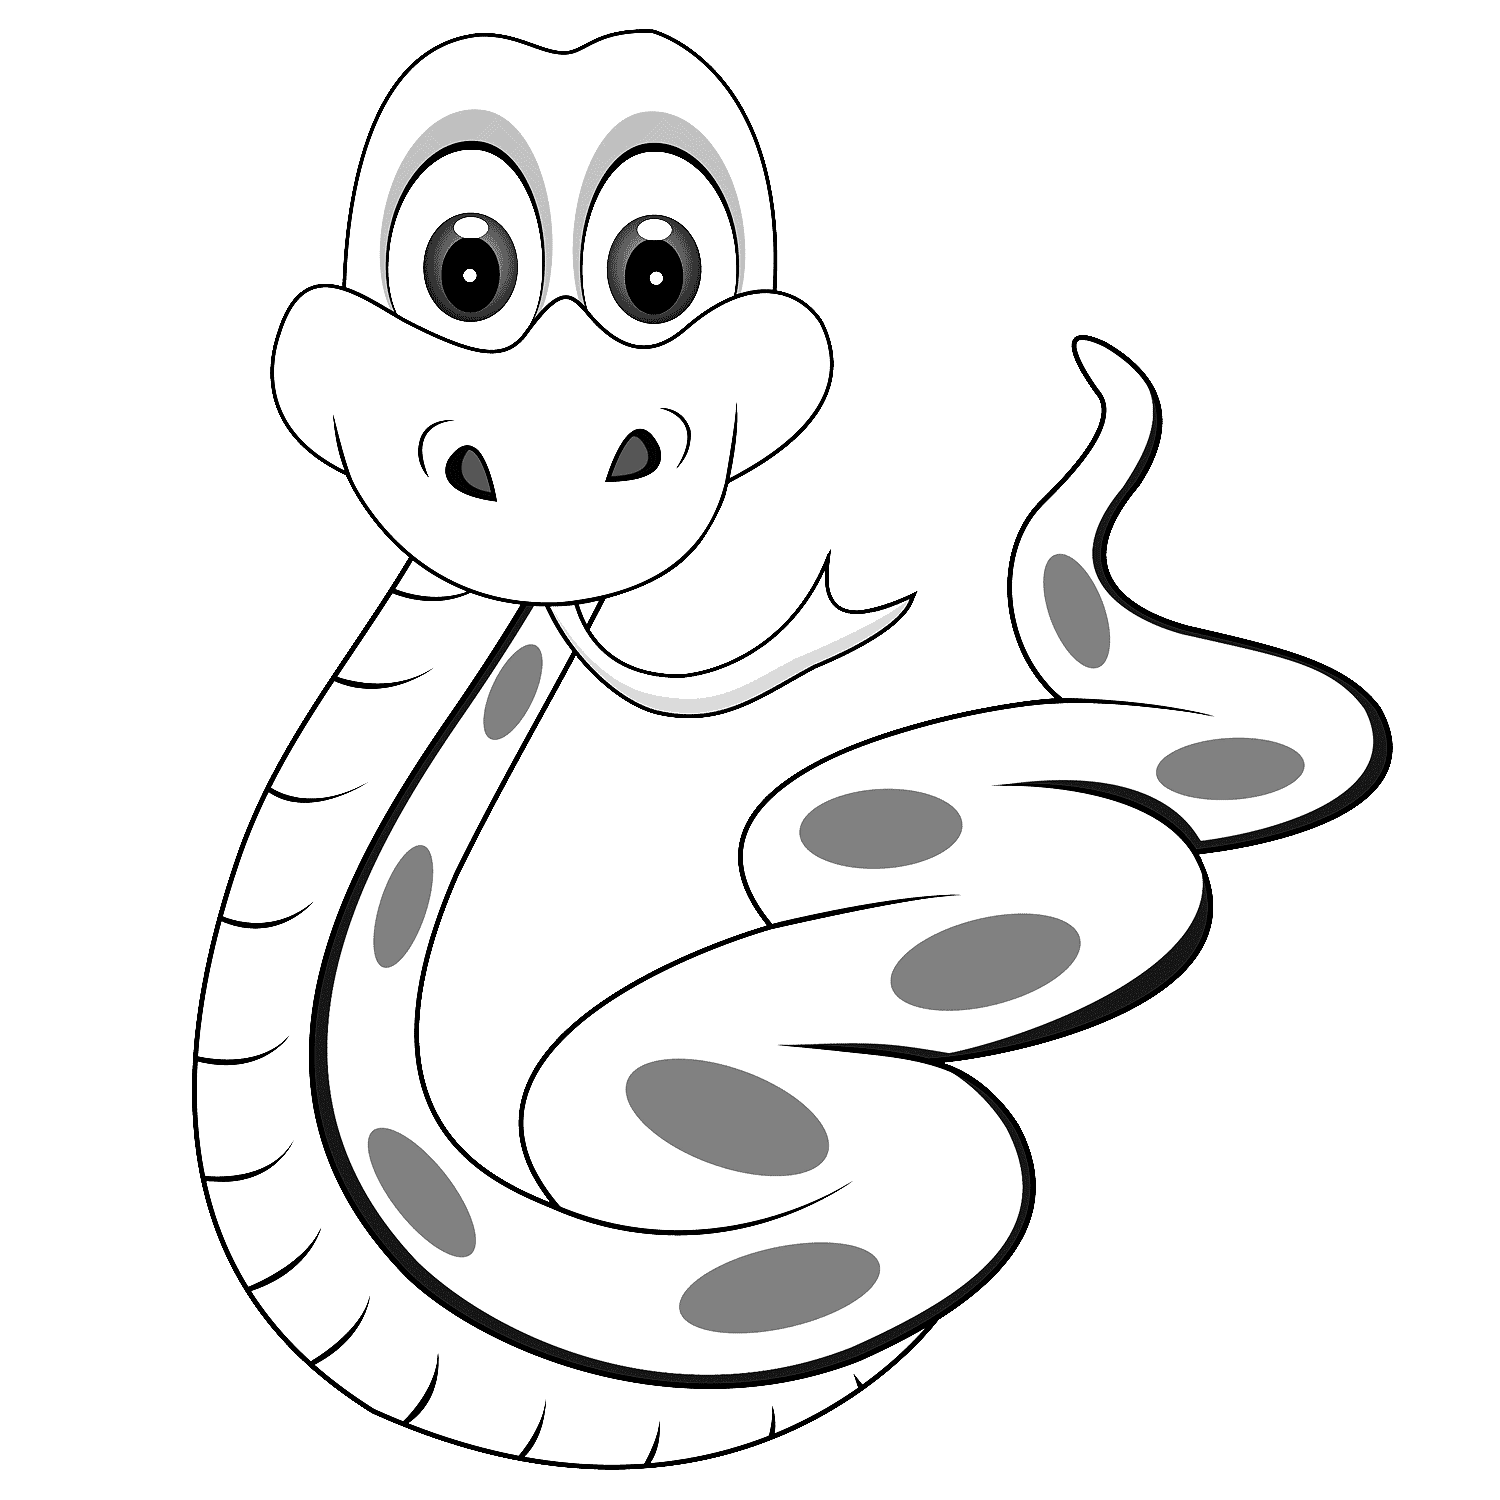 Free Snakes Coloring Pages Printable, Download Free Clip Art